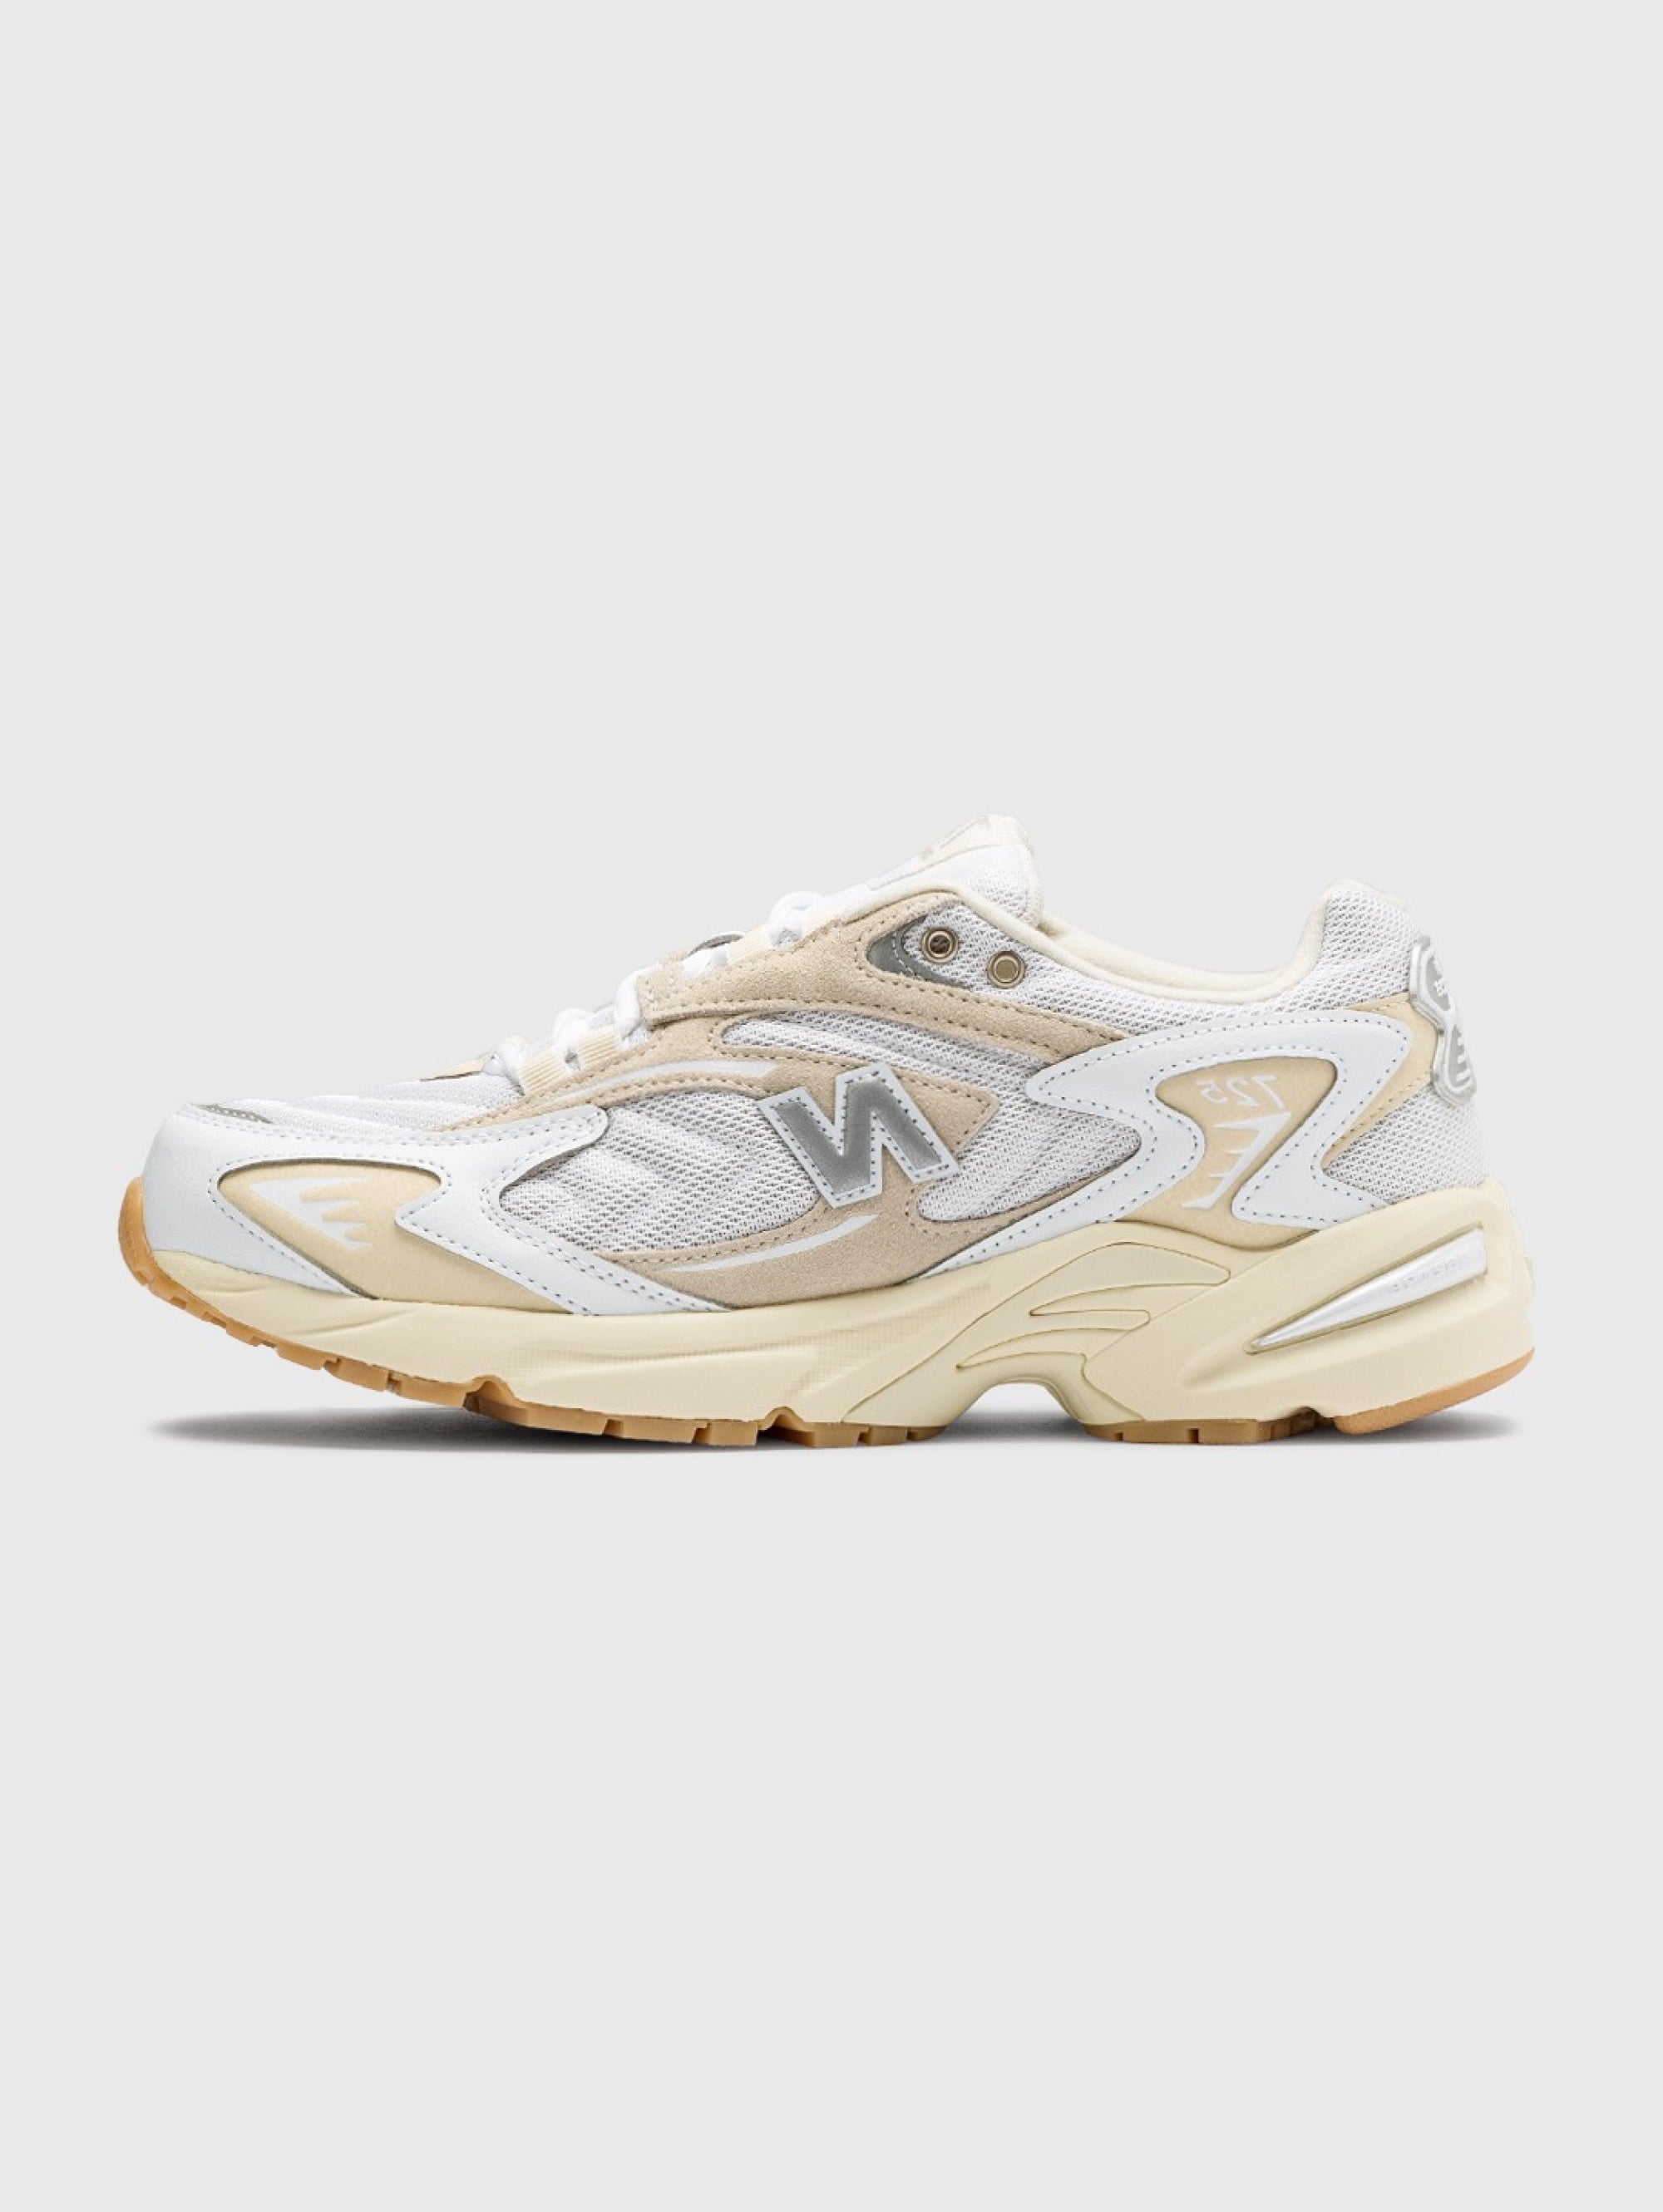 NEW BALANCE-Sneakers Lifestyle 725 Bianco/Beige-TRYME Shop